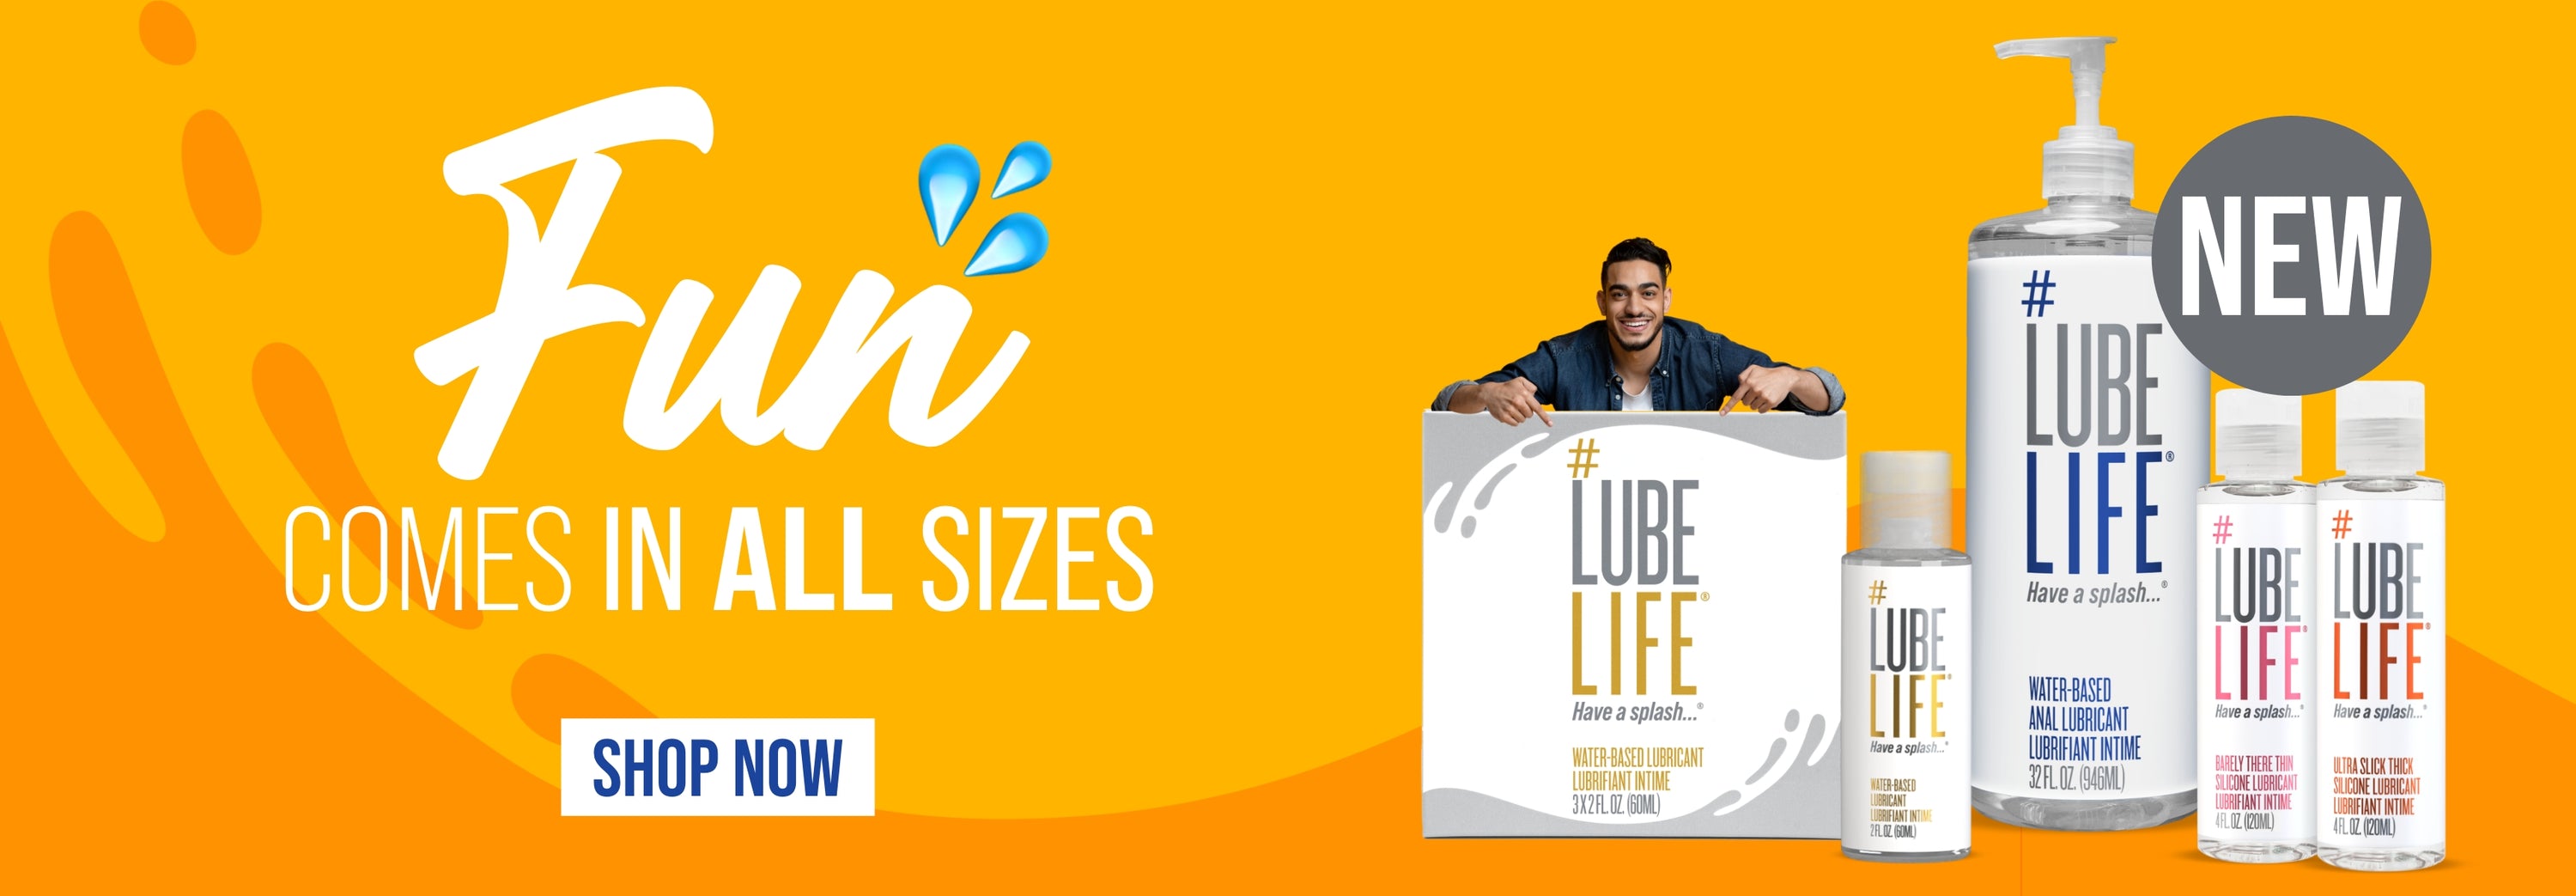 LubeLife on X: If you lube it, they will come. Meet #LubeLife's